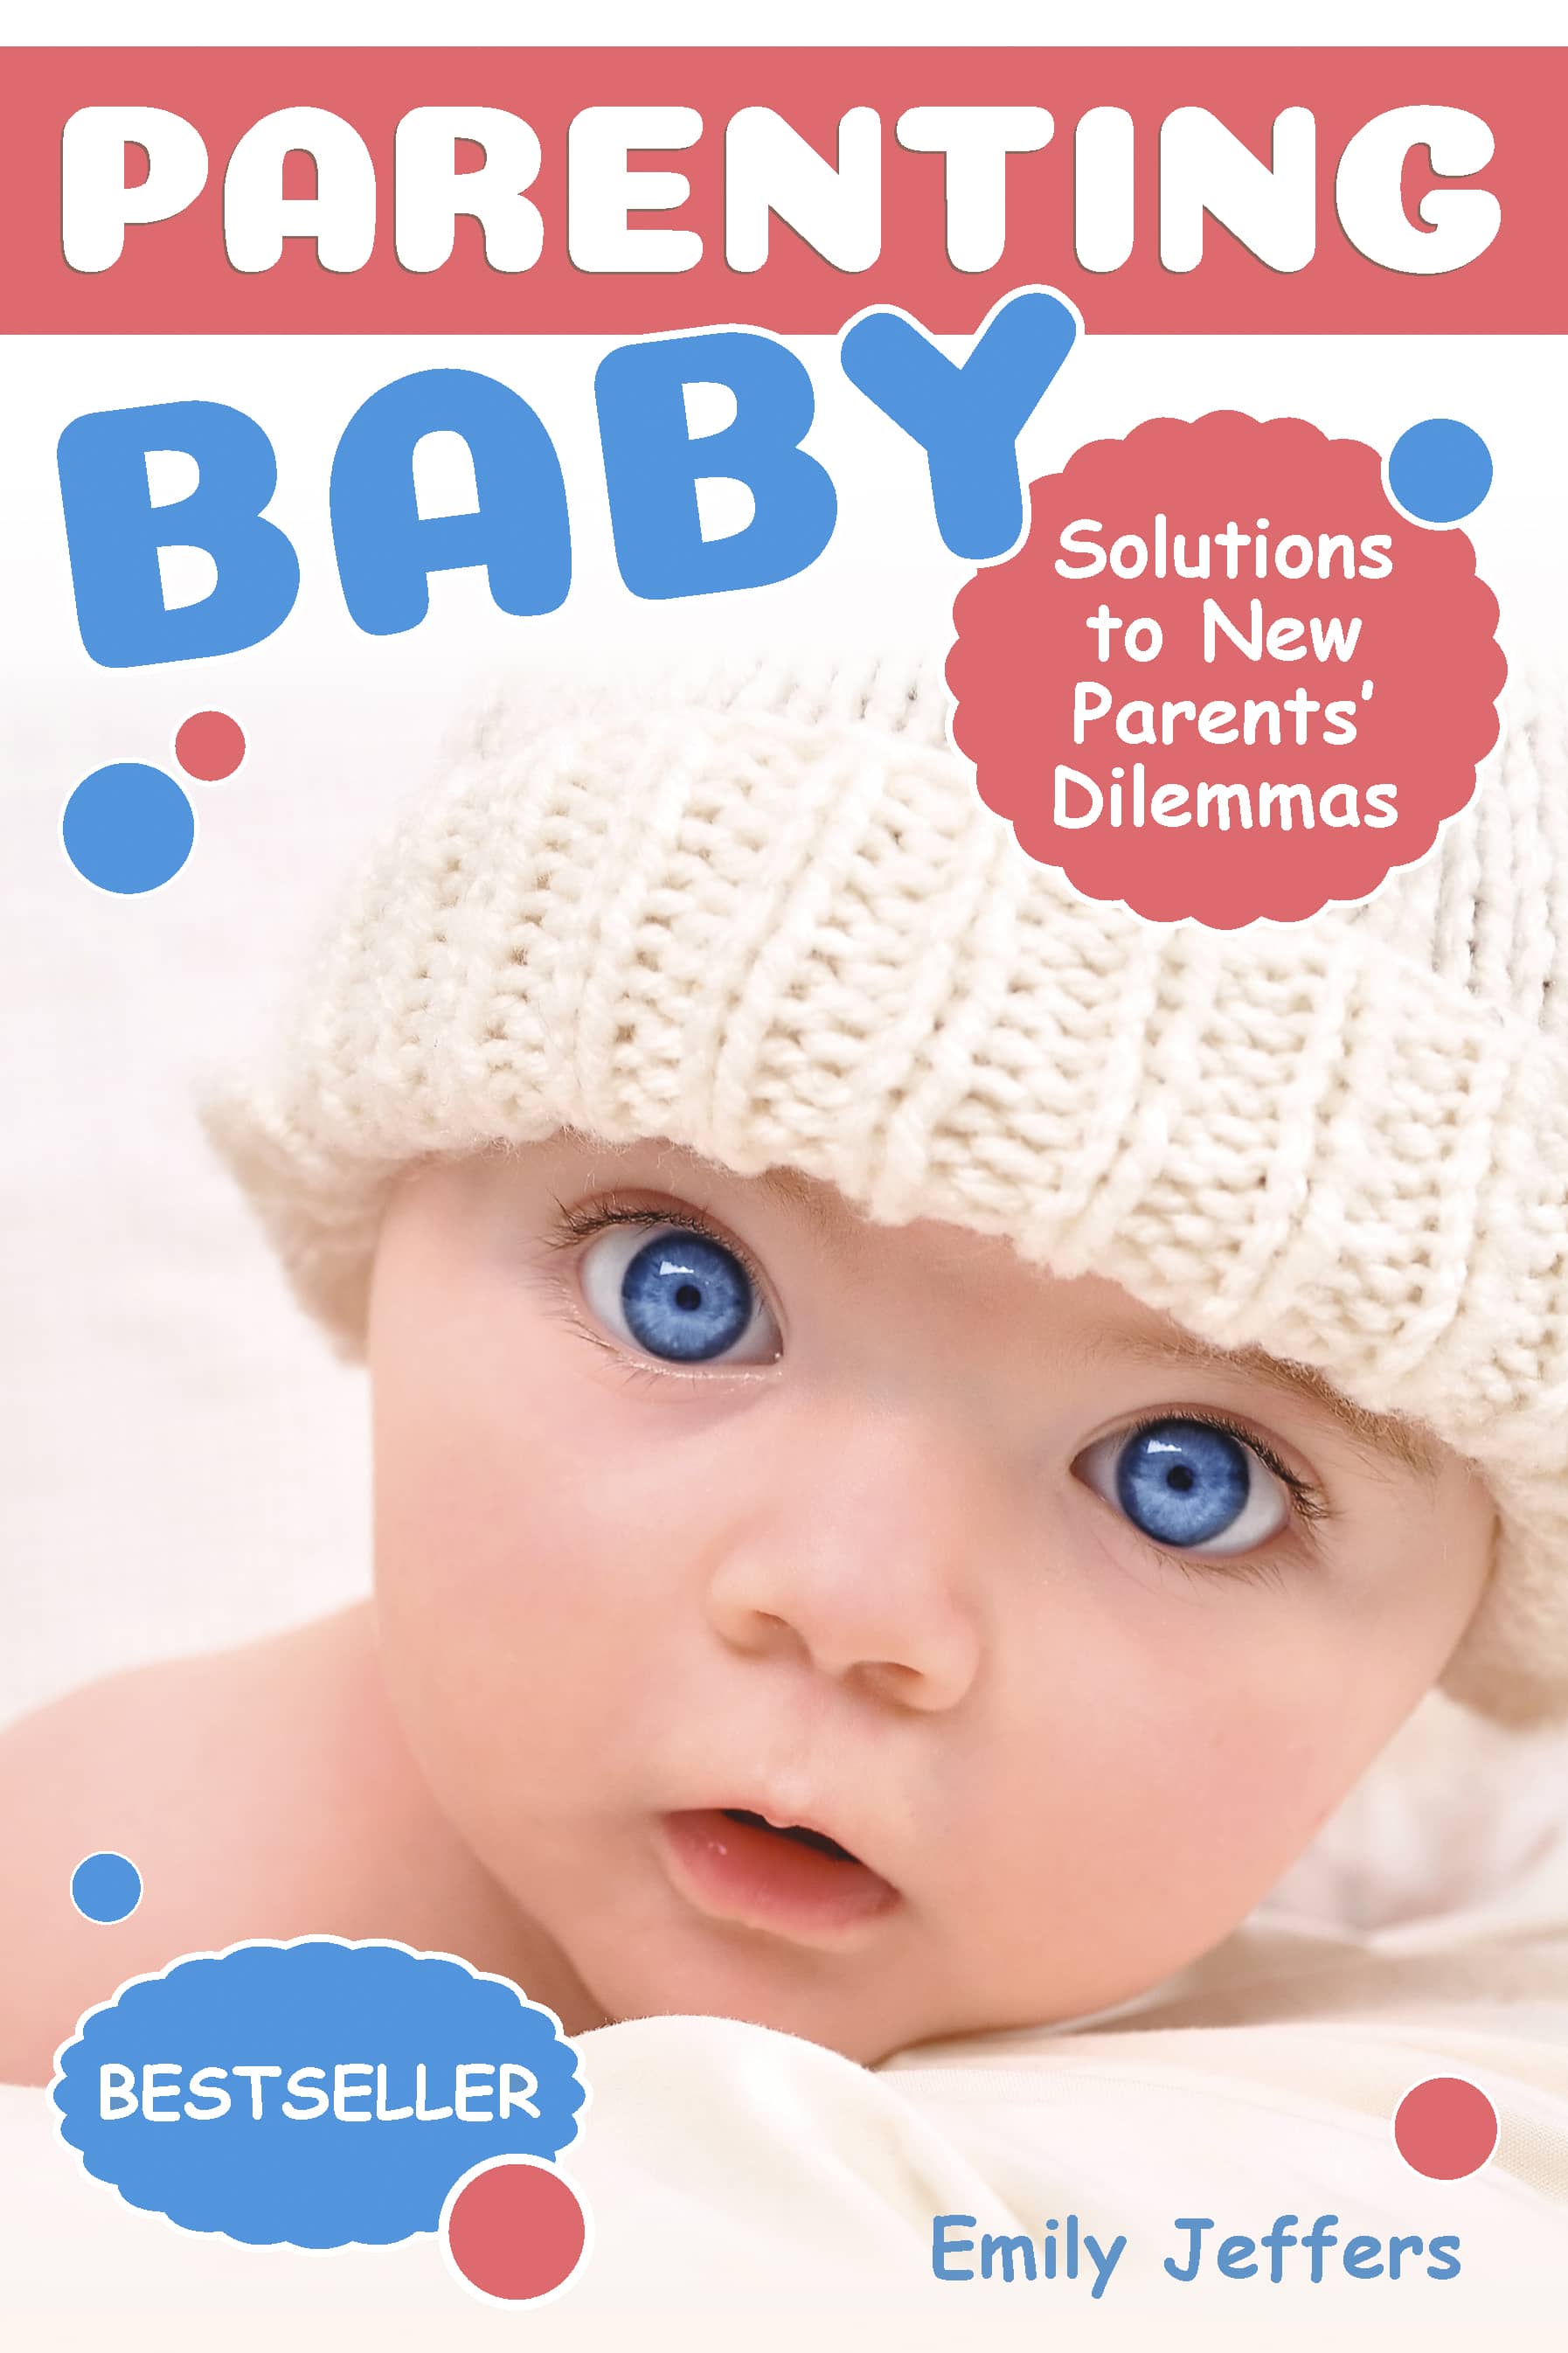 FREE: Parenting Baby: Solutions to New Parents’ Dilemmas by Emily Jeffers